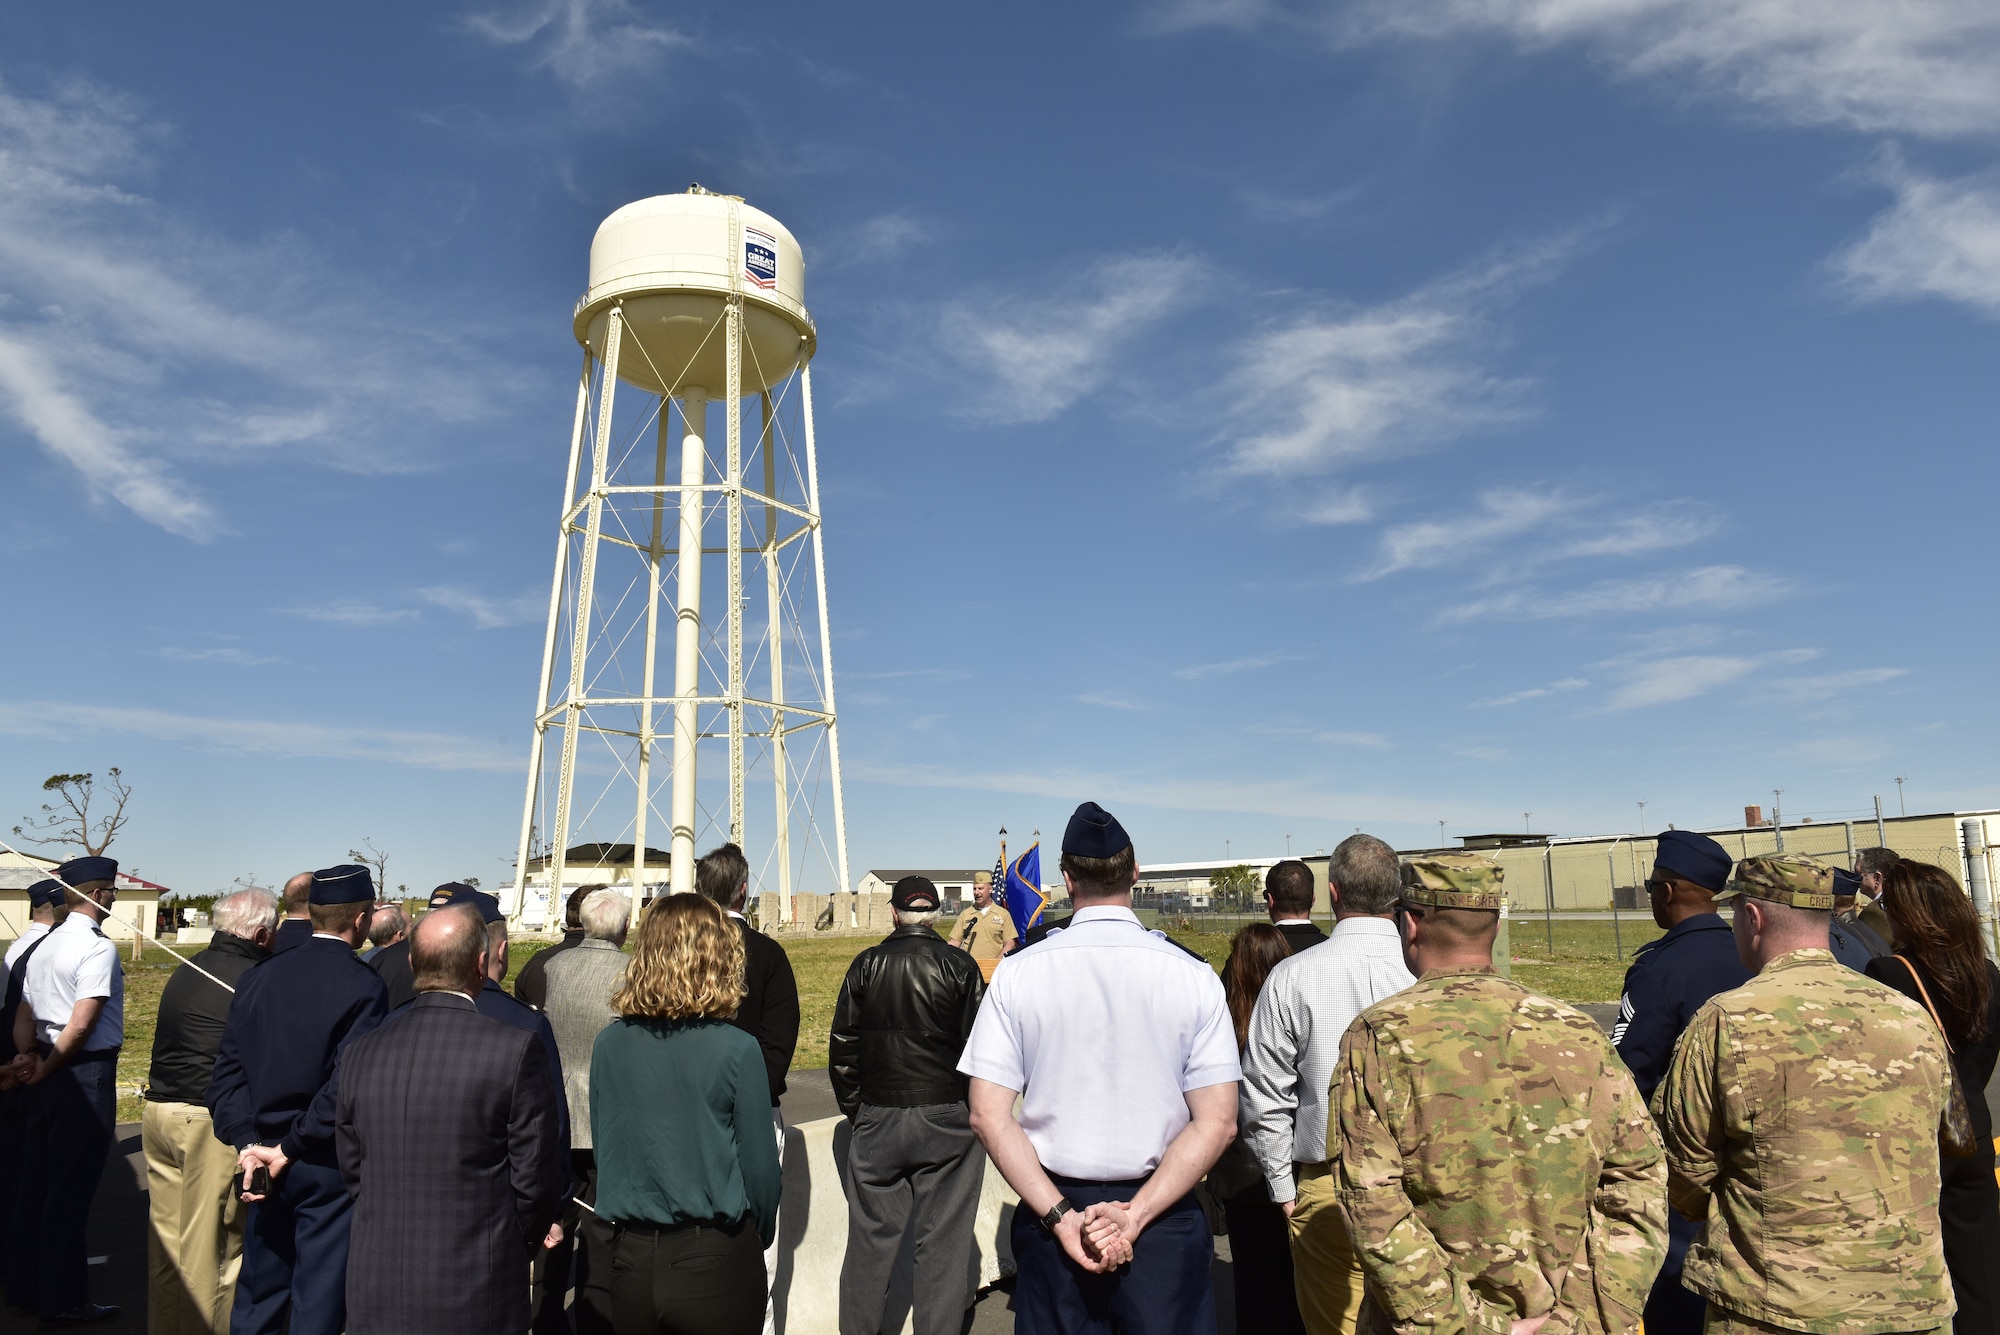 U.S. Navy Cmdr. Jay Sego, Naval Support Activity-Panama City commanding officer, gives his remarks about the importance of community support during an unveiling of a logo on the base water tower at Tyndall Air Force Base, Fla., Feb. 13, 2019. Tyndall was awarded the Great American Defense Community Award for 2019 with a commemorative logo painted on the water tower to represent Bay County’s accomplishments. Bay County is one of five communities across the country to be named a Great American Defense Community in 2019. (U.S. Air Force photo by Staff Sgt. Alexandre Montes)